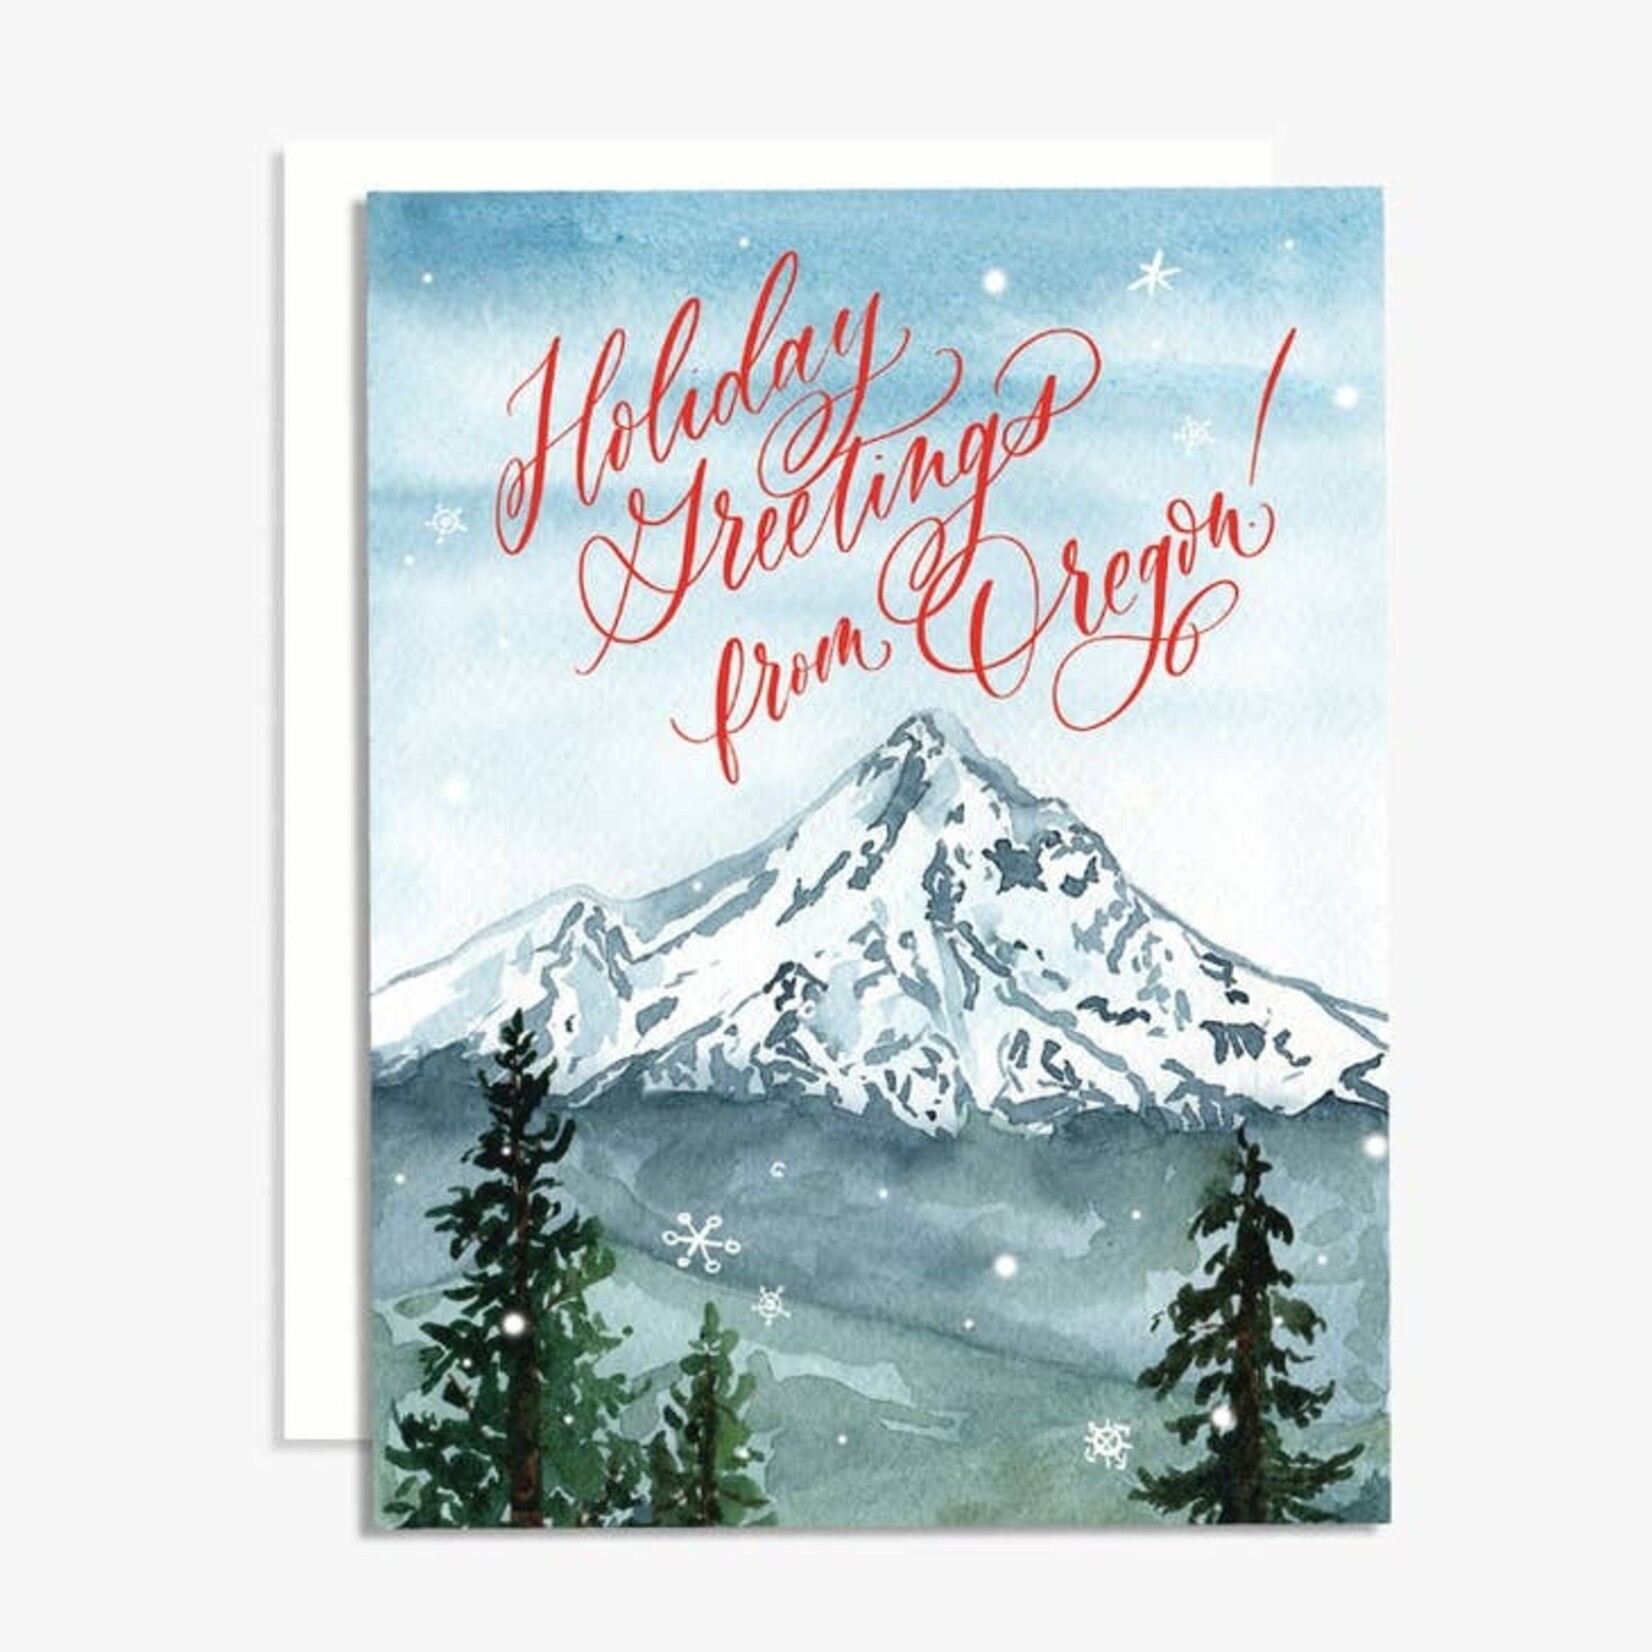 Greeting Cards - Boxed Holiday Greetings From Oregon Box of 5